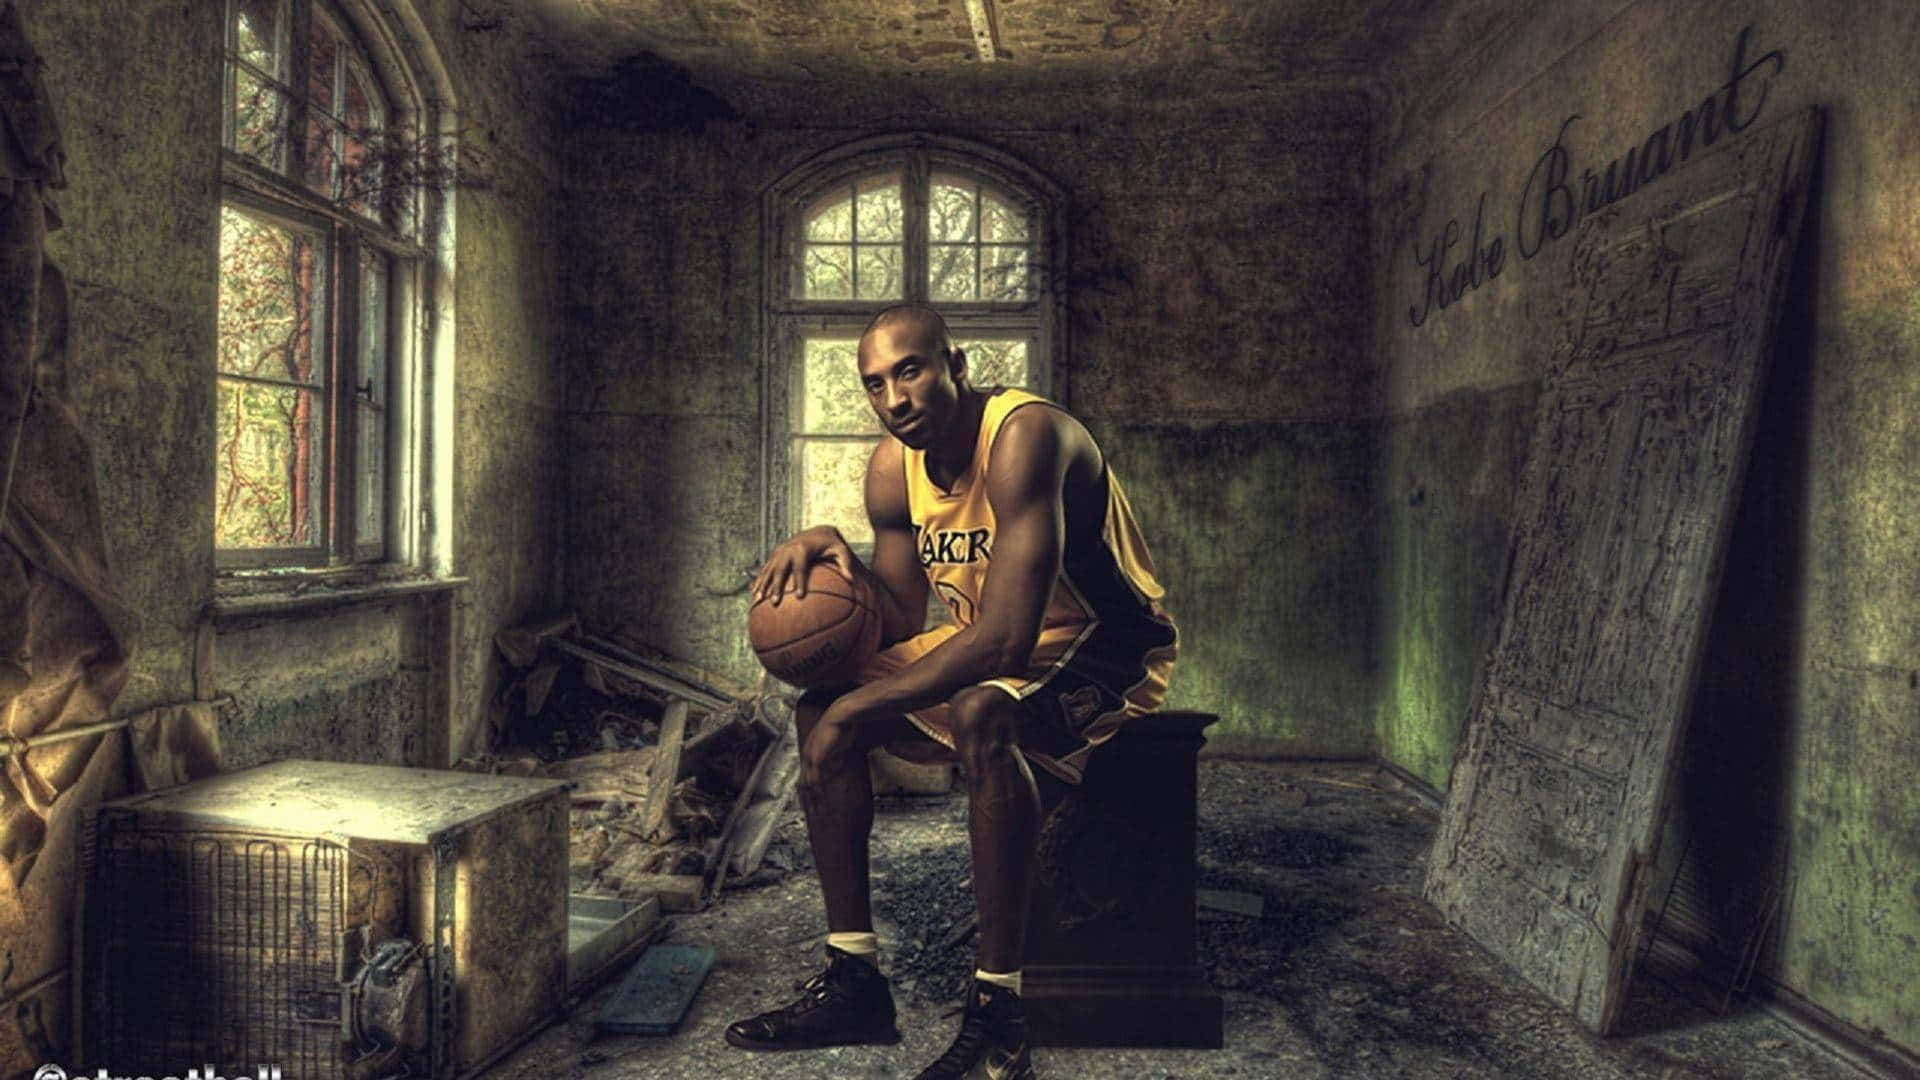 Get the power, style and performance of Kobe Bryant with the Kobe Bryant Phone Wallpaper